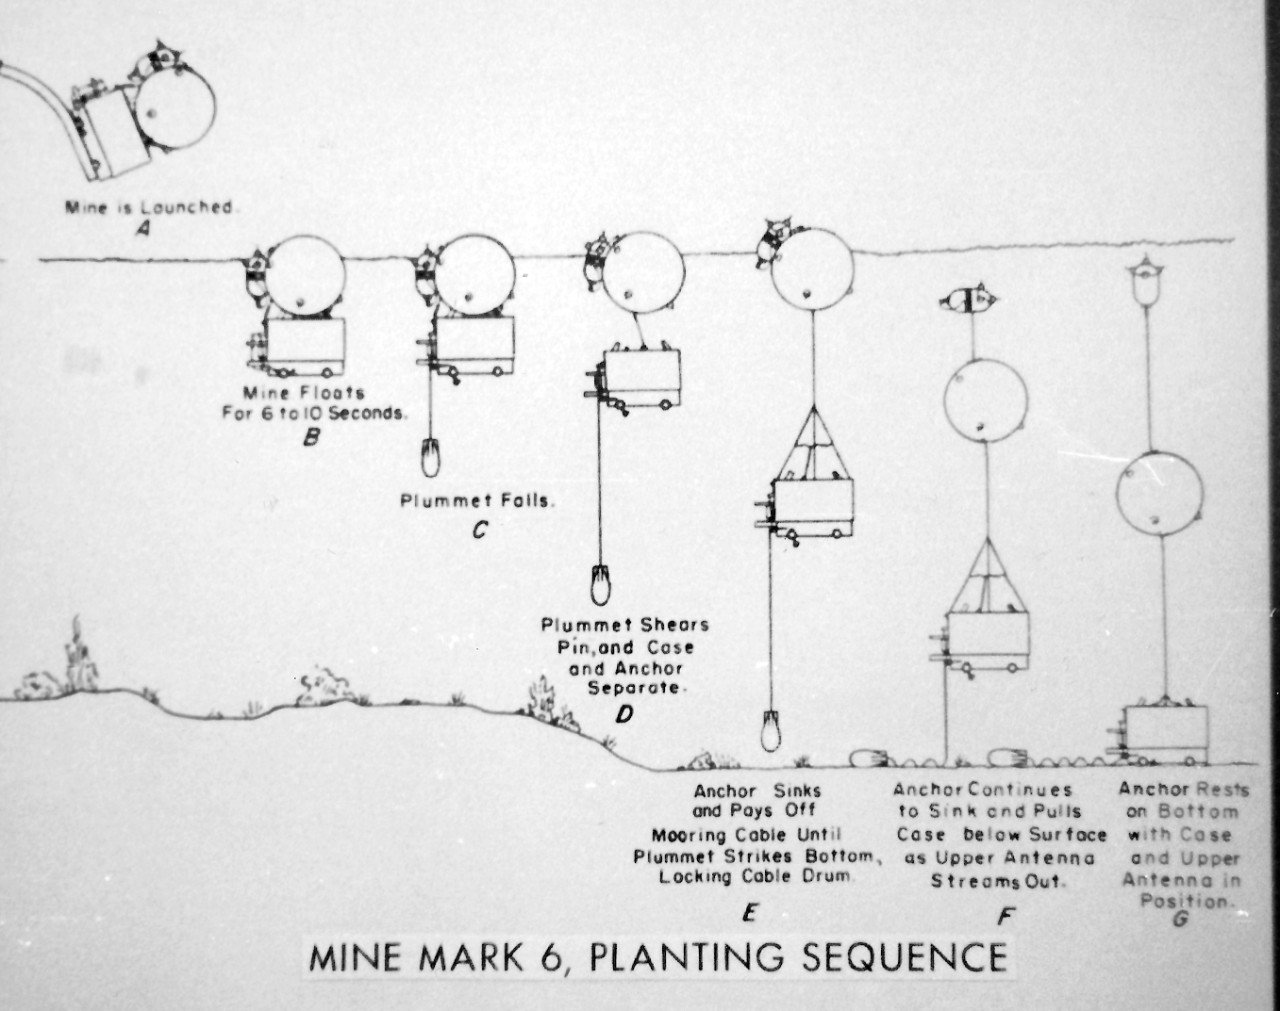 NMUSN-817: World War I Exhibit. This graphic shows how a MK6 mine worked during the North Sea Mine Barrage. National Museum of the U.S. Navy Photograph Collection.